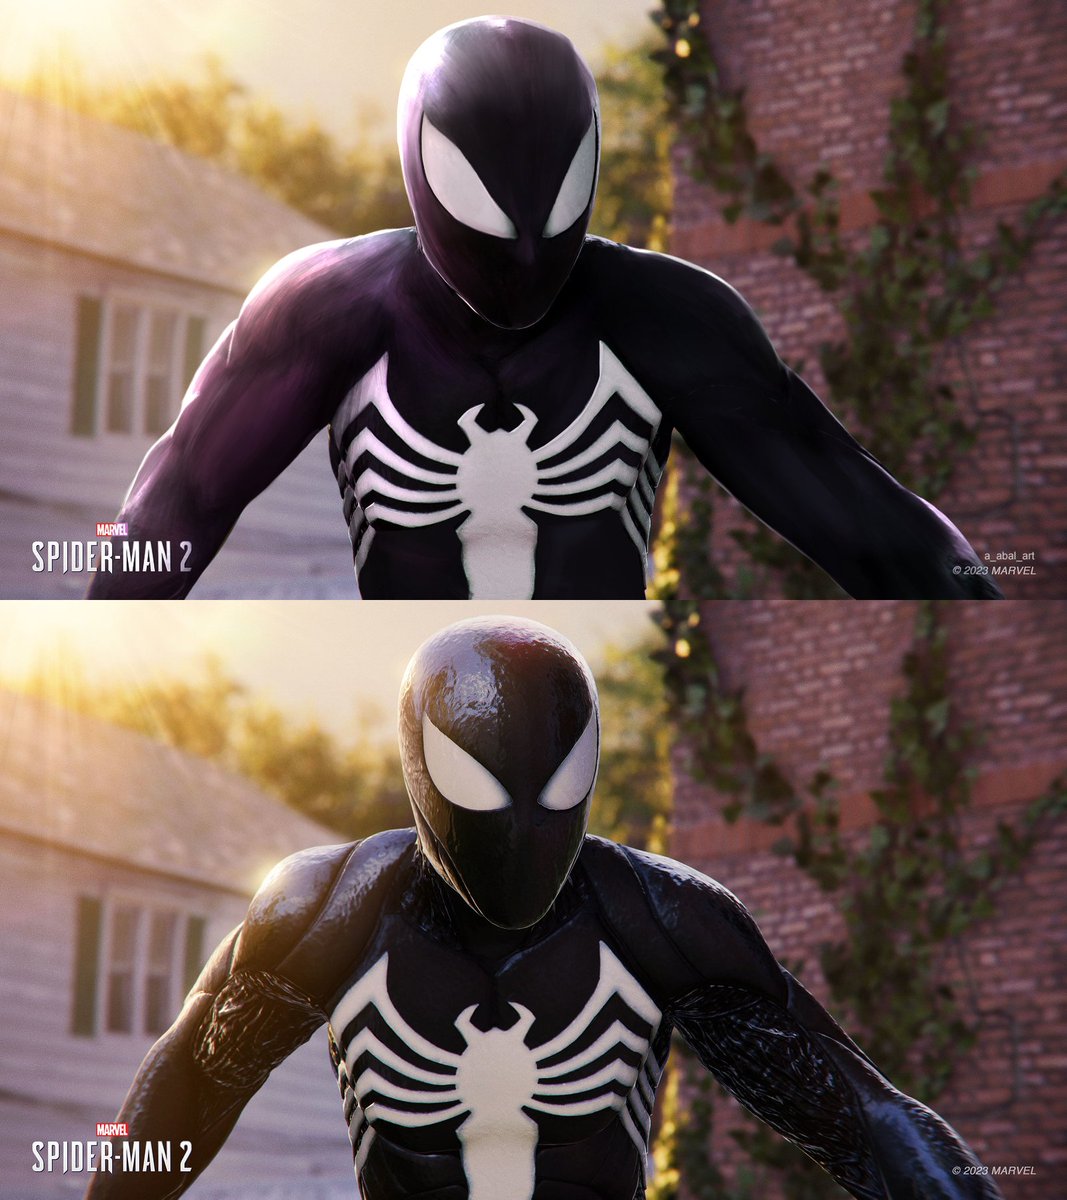 I have imagined how the classic black spiderman suit could be in the new game of marvel's spiderman 2
#SpiderMan2PS5 #SpiderMan2